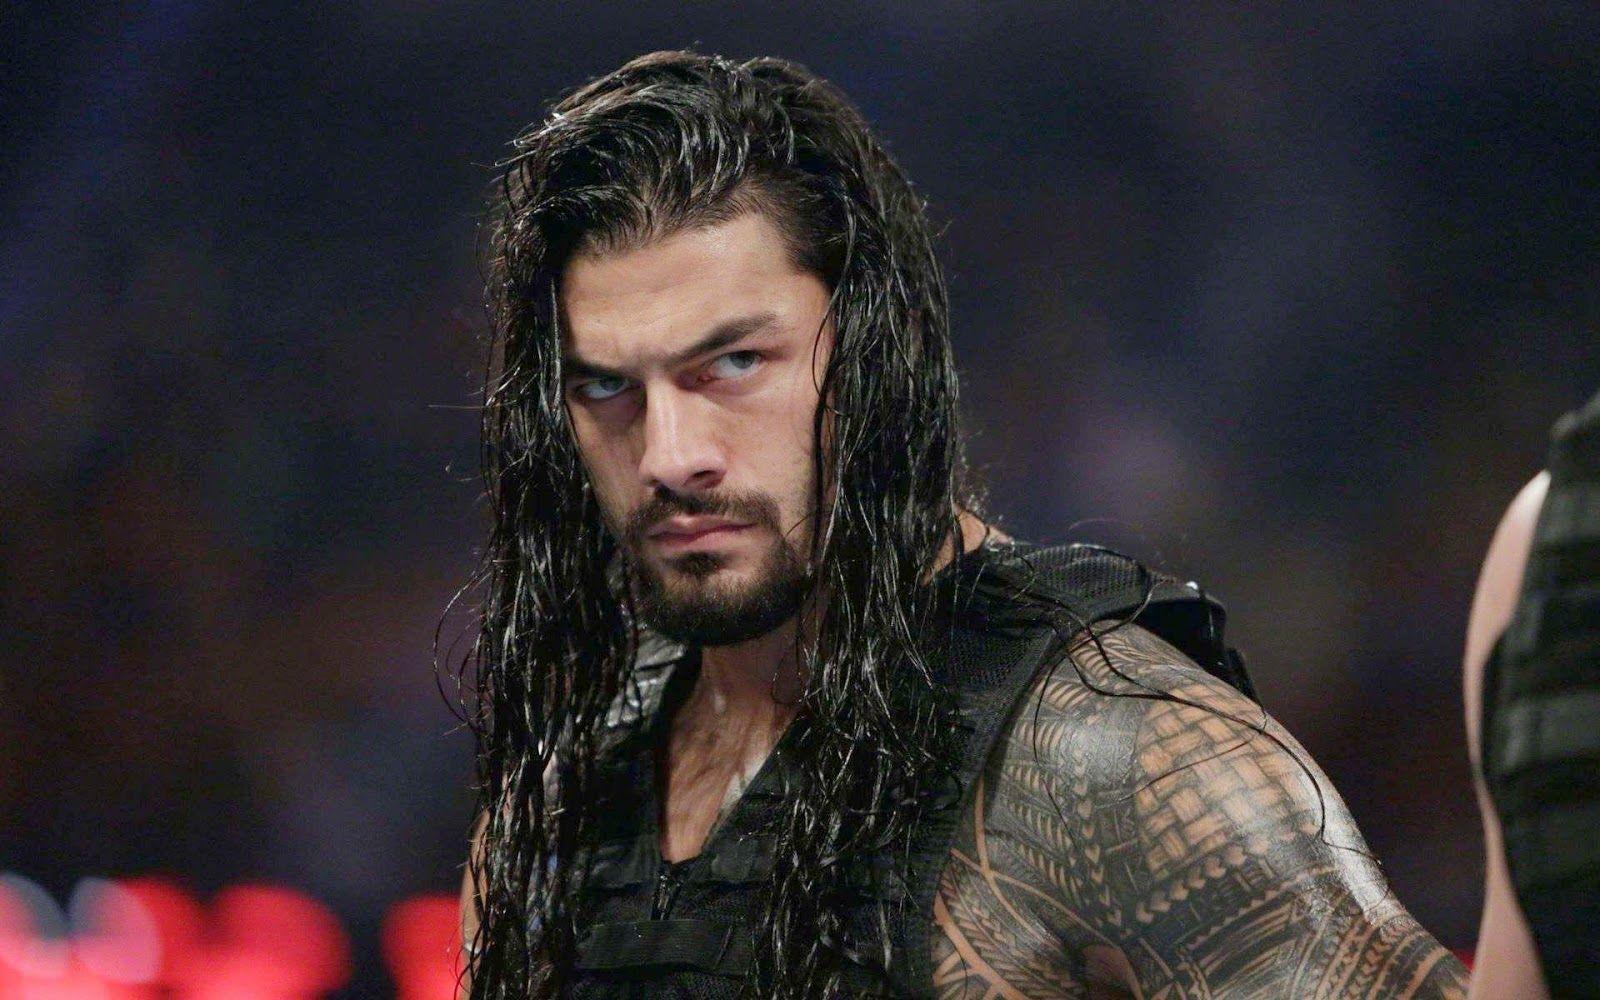 HD Of Roman Reigns Wallpapers - Wallpaper Cave